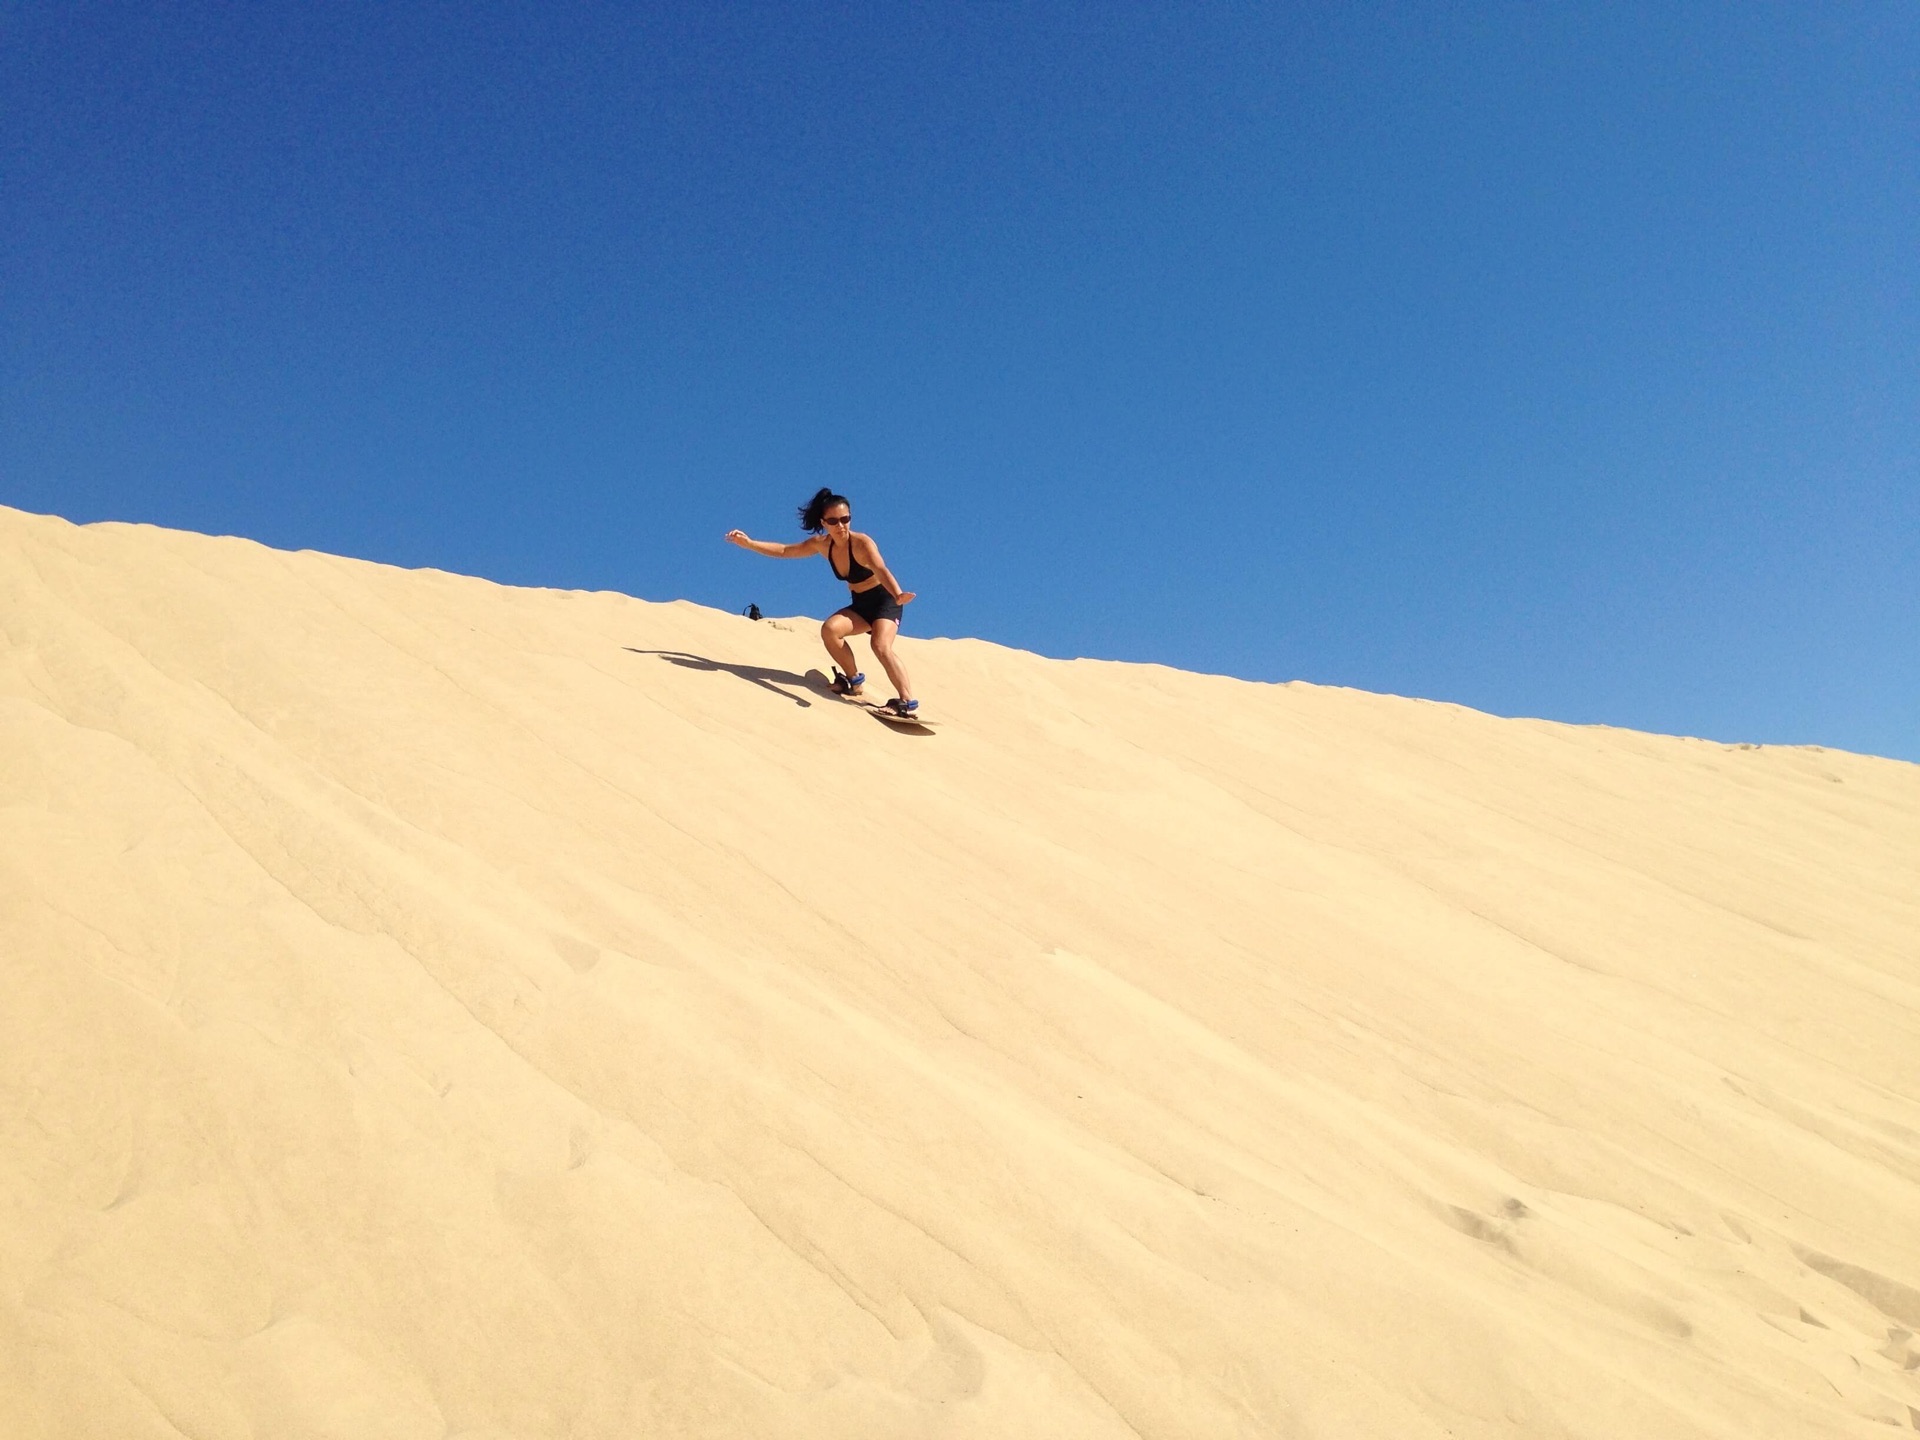 Sand boarding at Silver Lake Sand Dunes, Mears